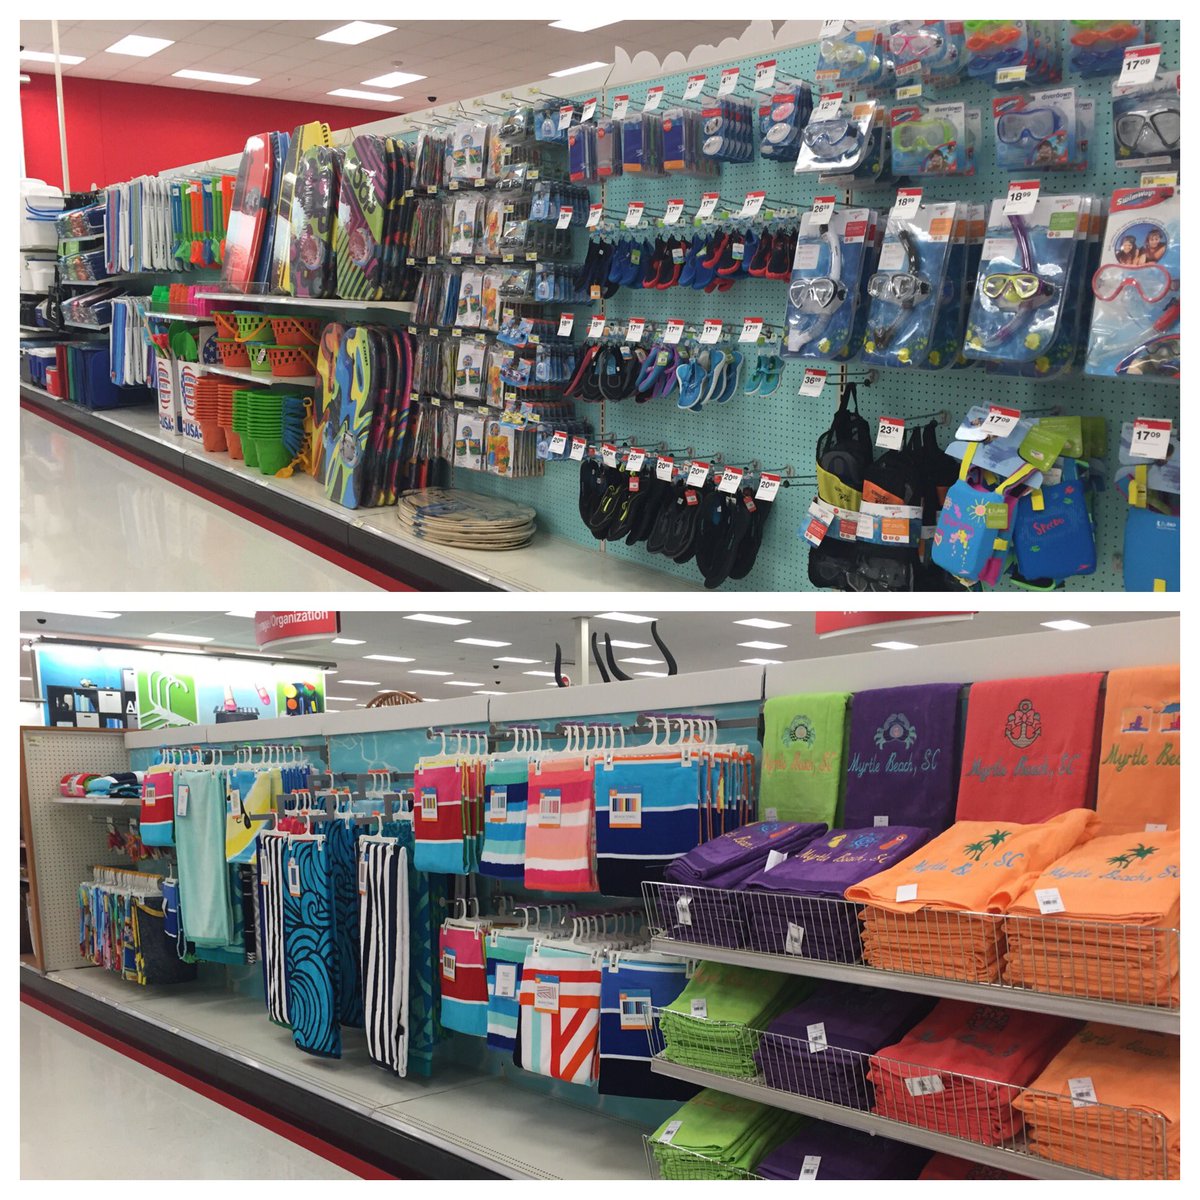 Thank you @Ellie35078 @scsurfer89 and @AngT_DiPierro for getting us #springbreakready at T2742! @keith_mazzoni